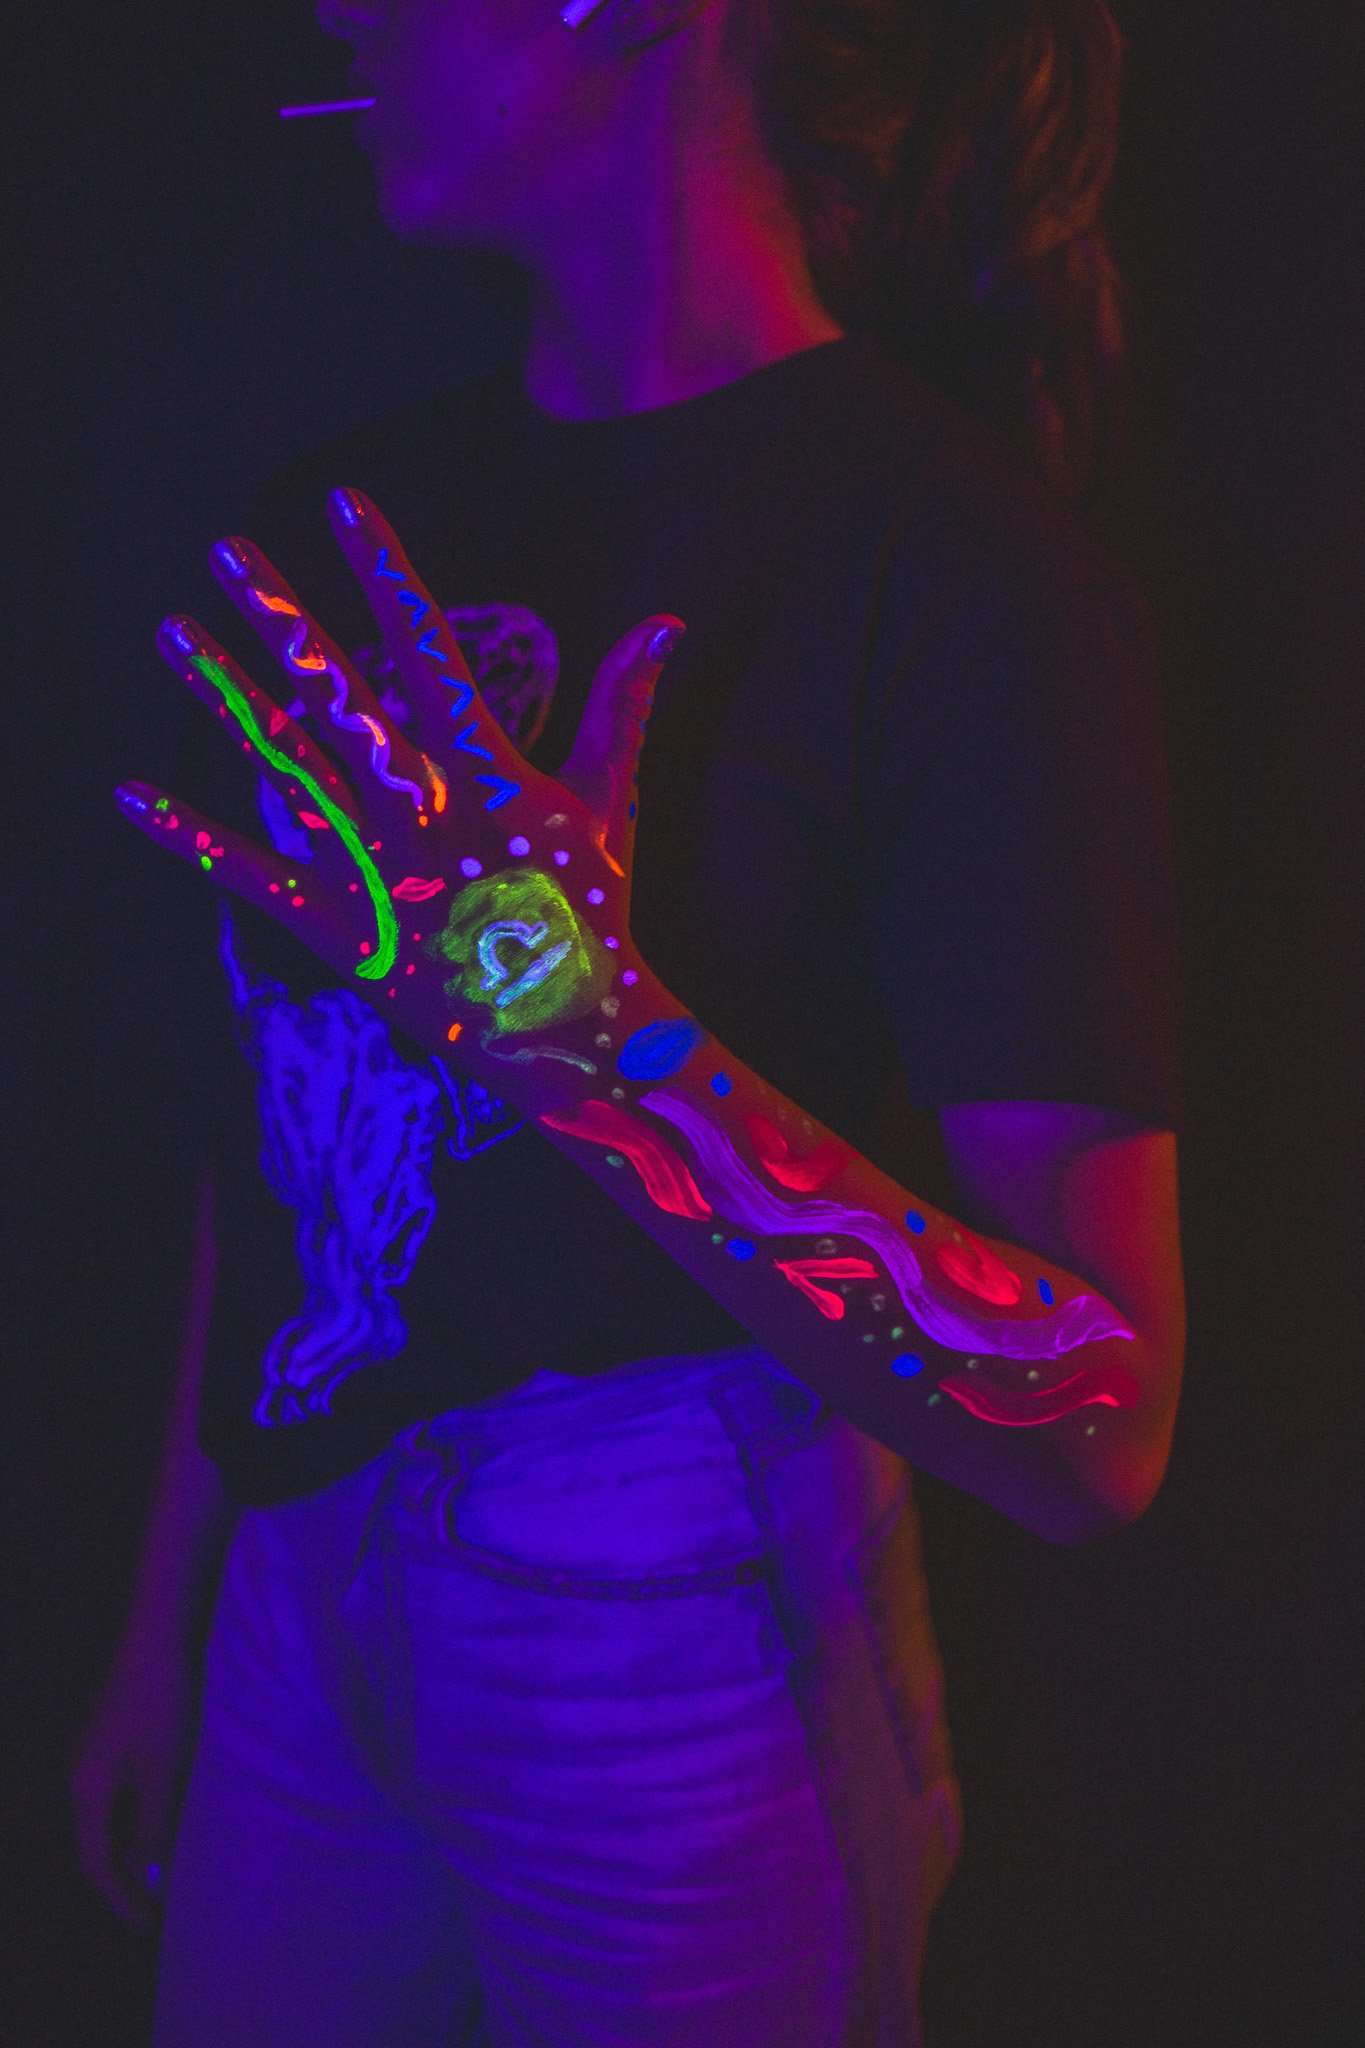 Kid poses with geometric neon body paint on their arm for alternative neon body painting creative photoshoot by phoenix body artist assistant of La Luna Henna and photographer Jennifer Lind Schutsky.